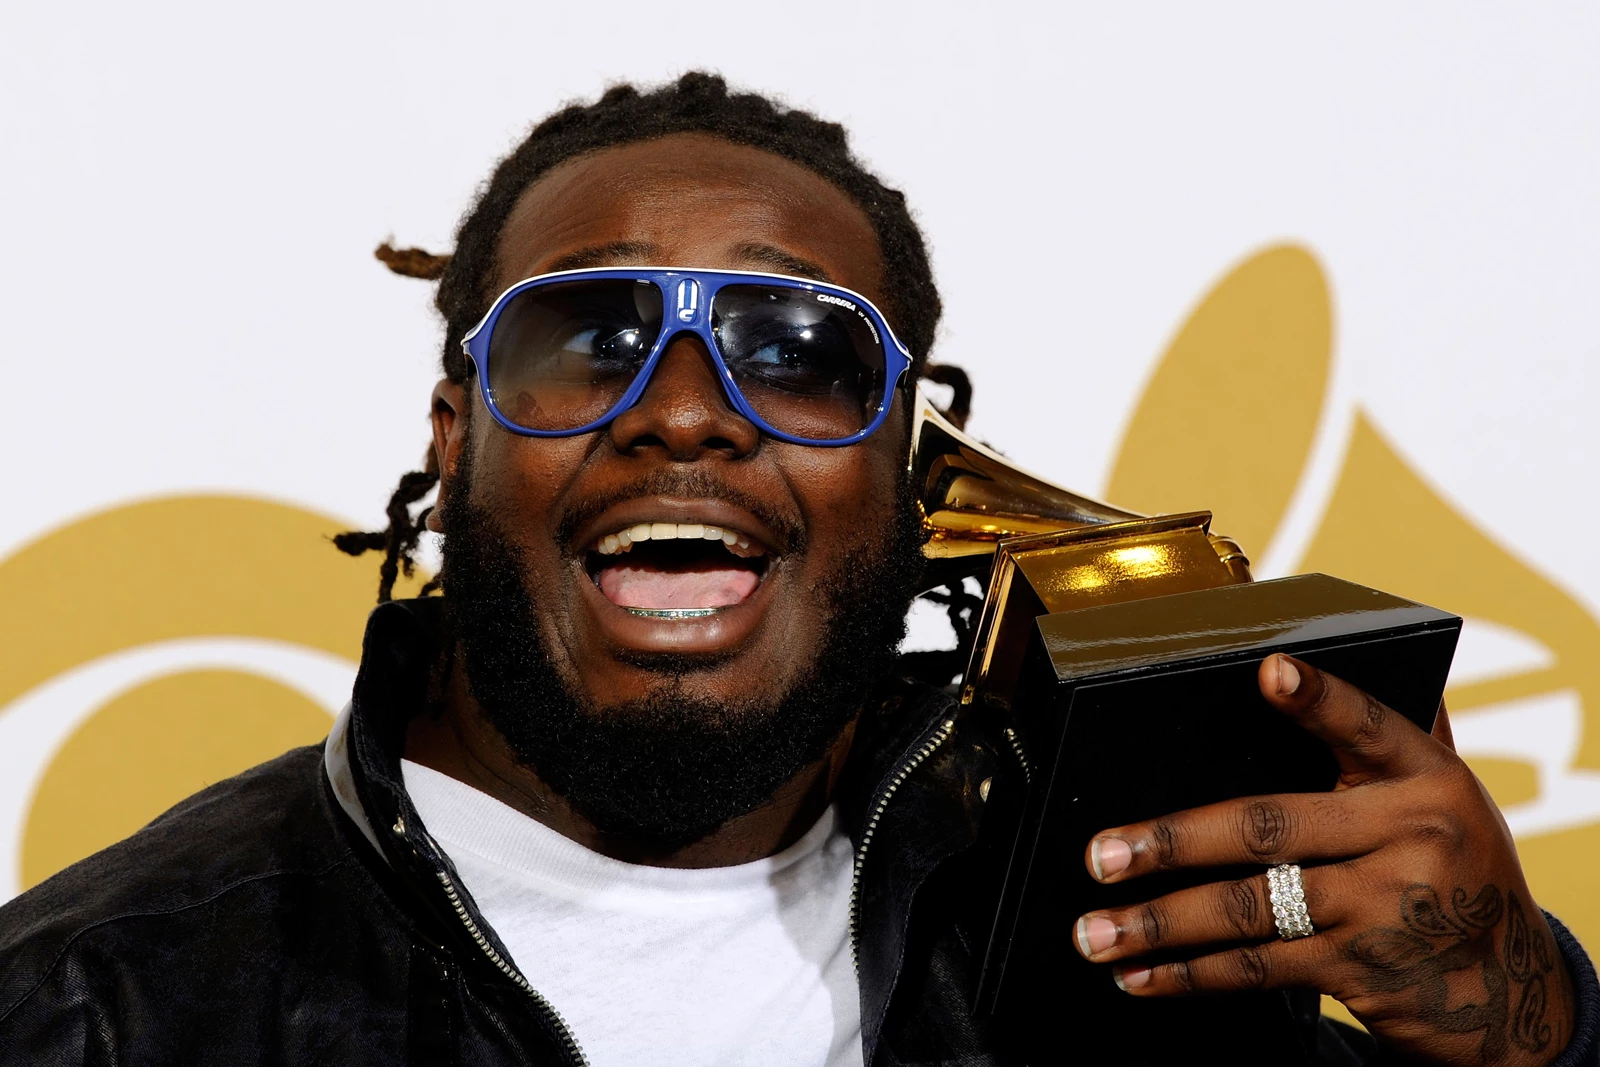 T-Pain to headline AFC Championship Halftime show